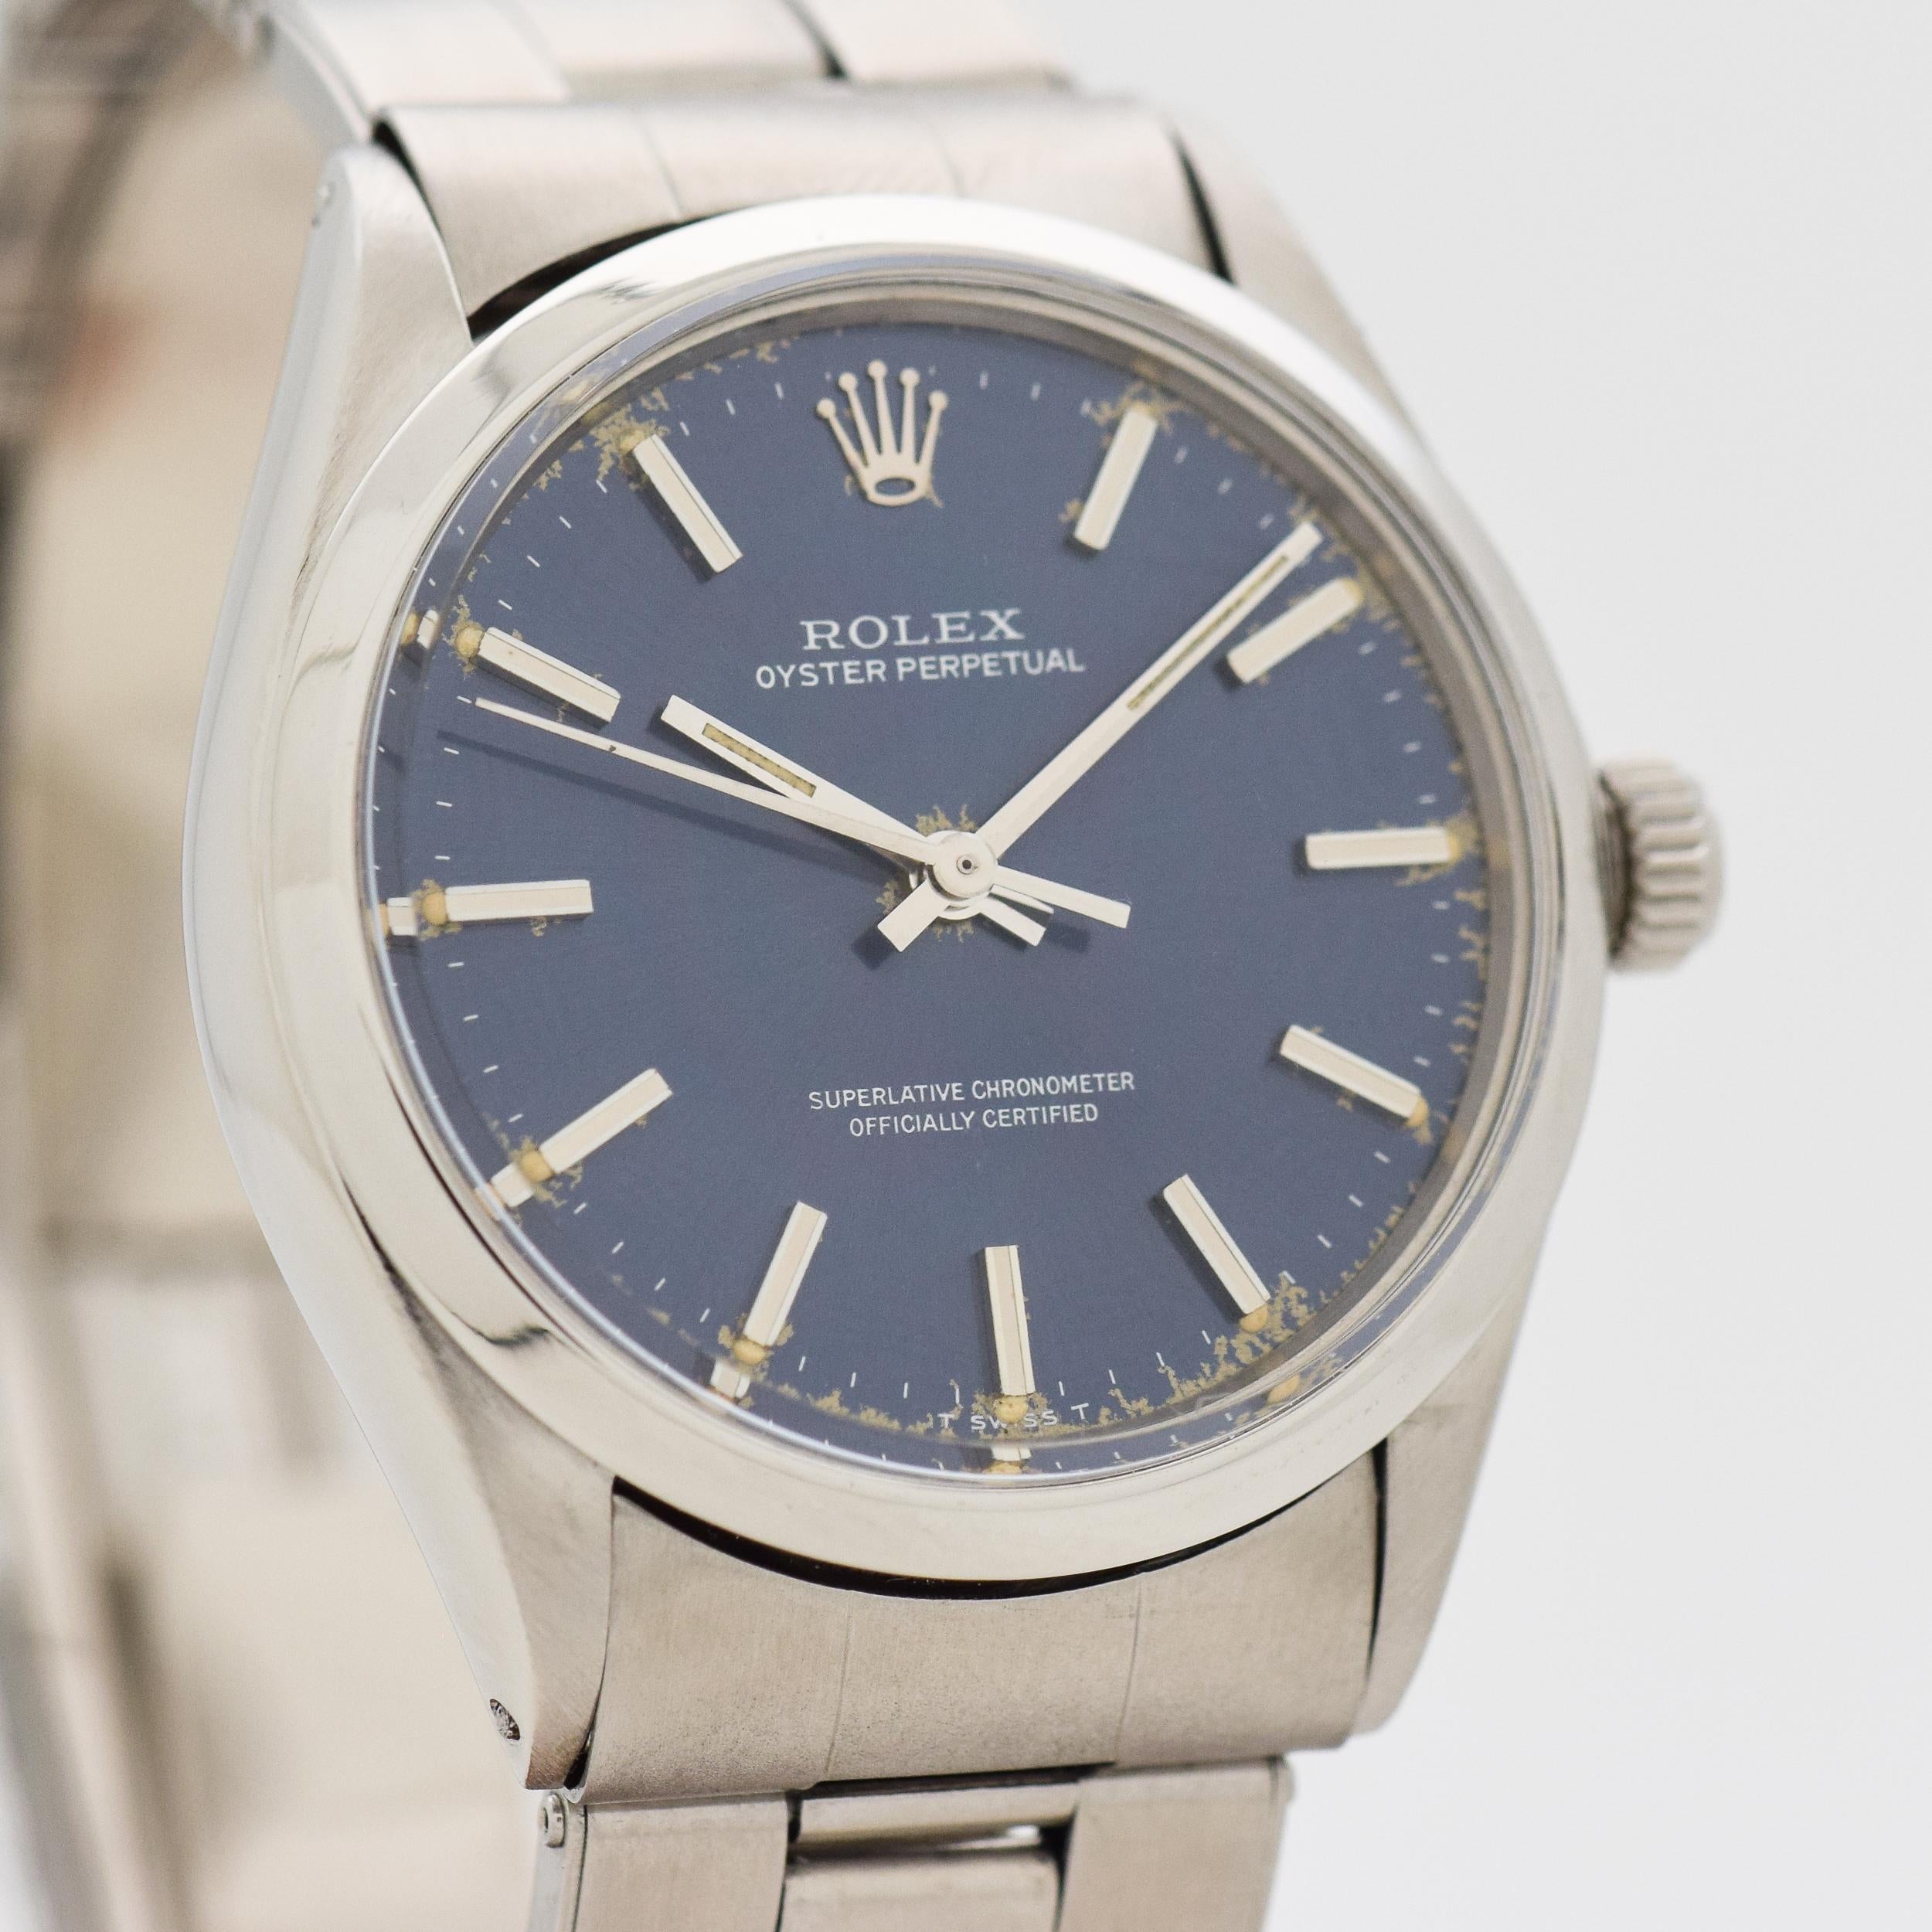 1972 Vintage Rolex Oyster Perpetual Ref. 1002 Stainless Steel watch with Original Blue Dial with Applied Steel Bar/Baton Markers with Black Inlay with Original Rolex Stainless Steel Oyster Bracelet. Fits a 7 1/4 inch Wrist. 34mm x 38mm lug to lug